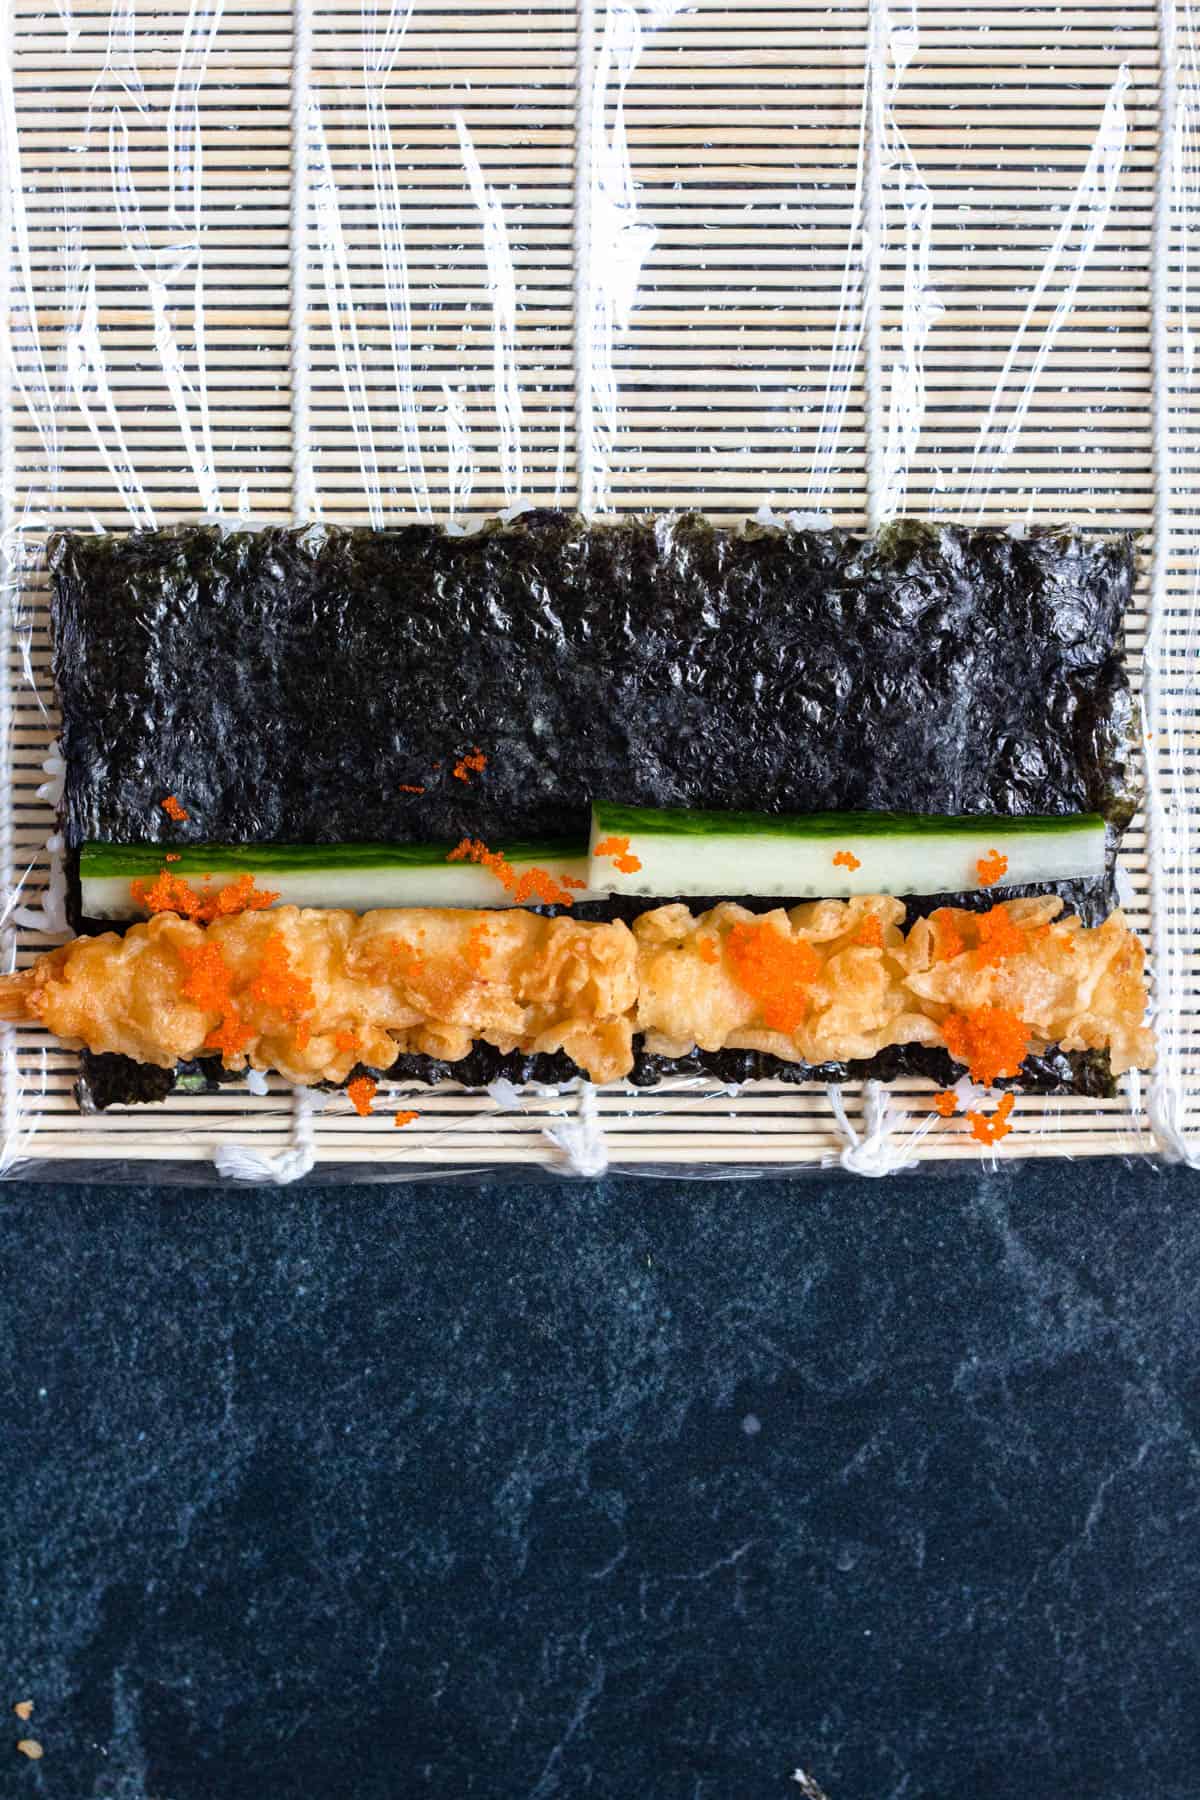 Dragon roll toppings on the nori sheet. 